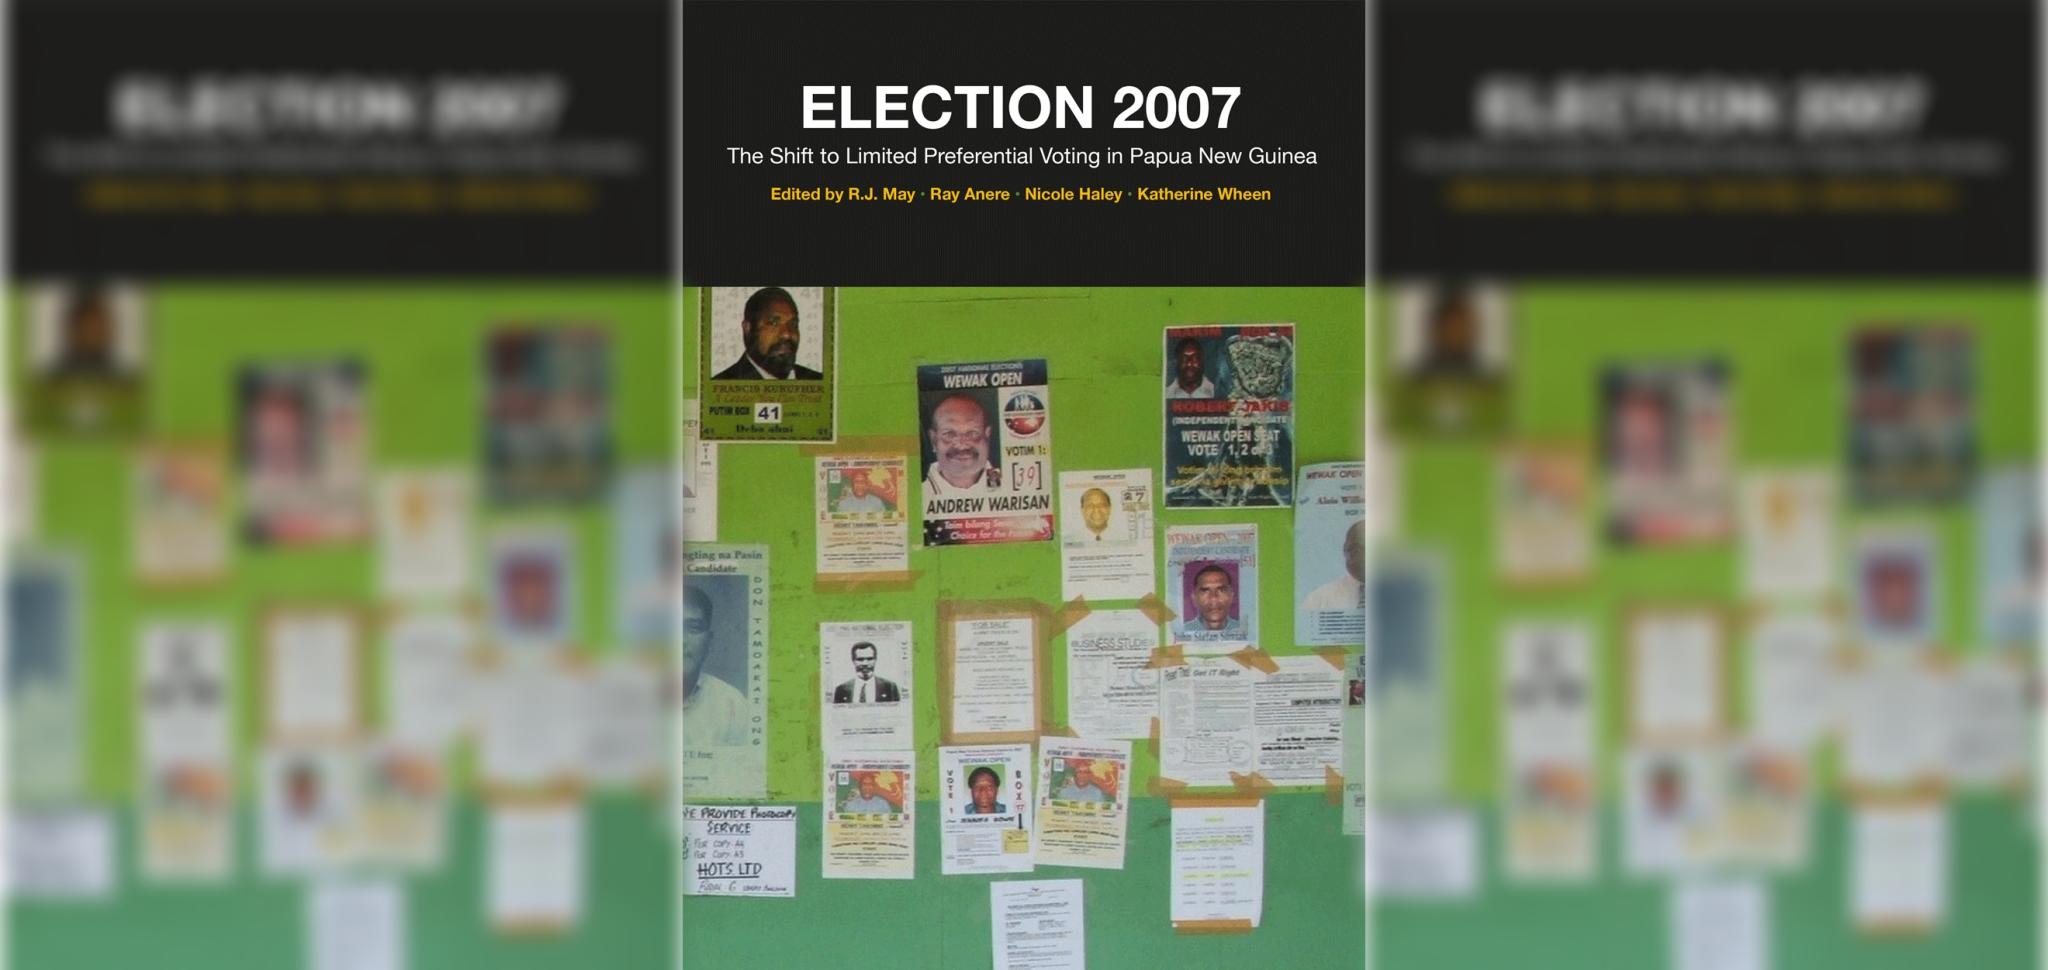 Election 2007 The Shift to Limited Preferential Voting in Papua New Guinea